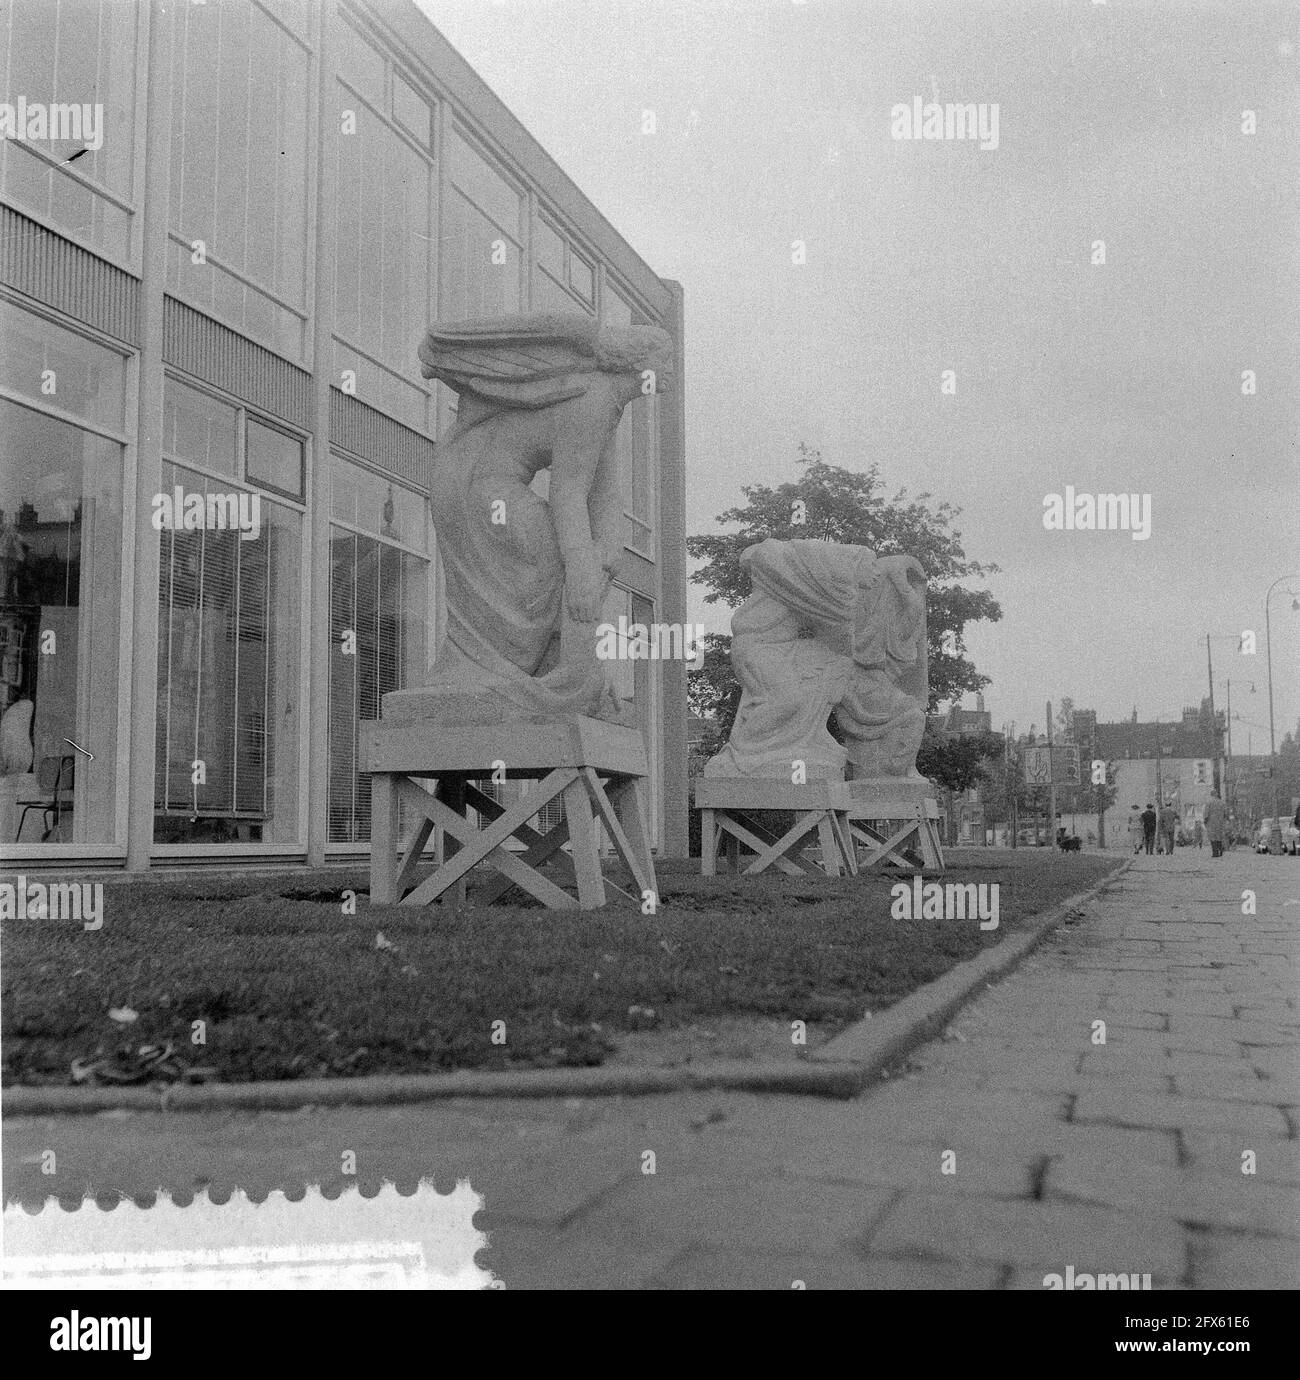 H. van Lith in front of Municipal Museum for Philips monument / dark, May 30, 1957, The Netherlands, 20th century press agency photo, news to remember, documentary, historic photography 1945-1990, visual stories, human history of the Twentieth Century, capturing moments in time Stock Photo